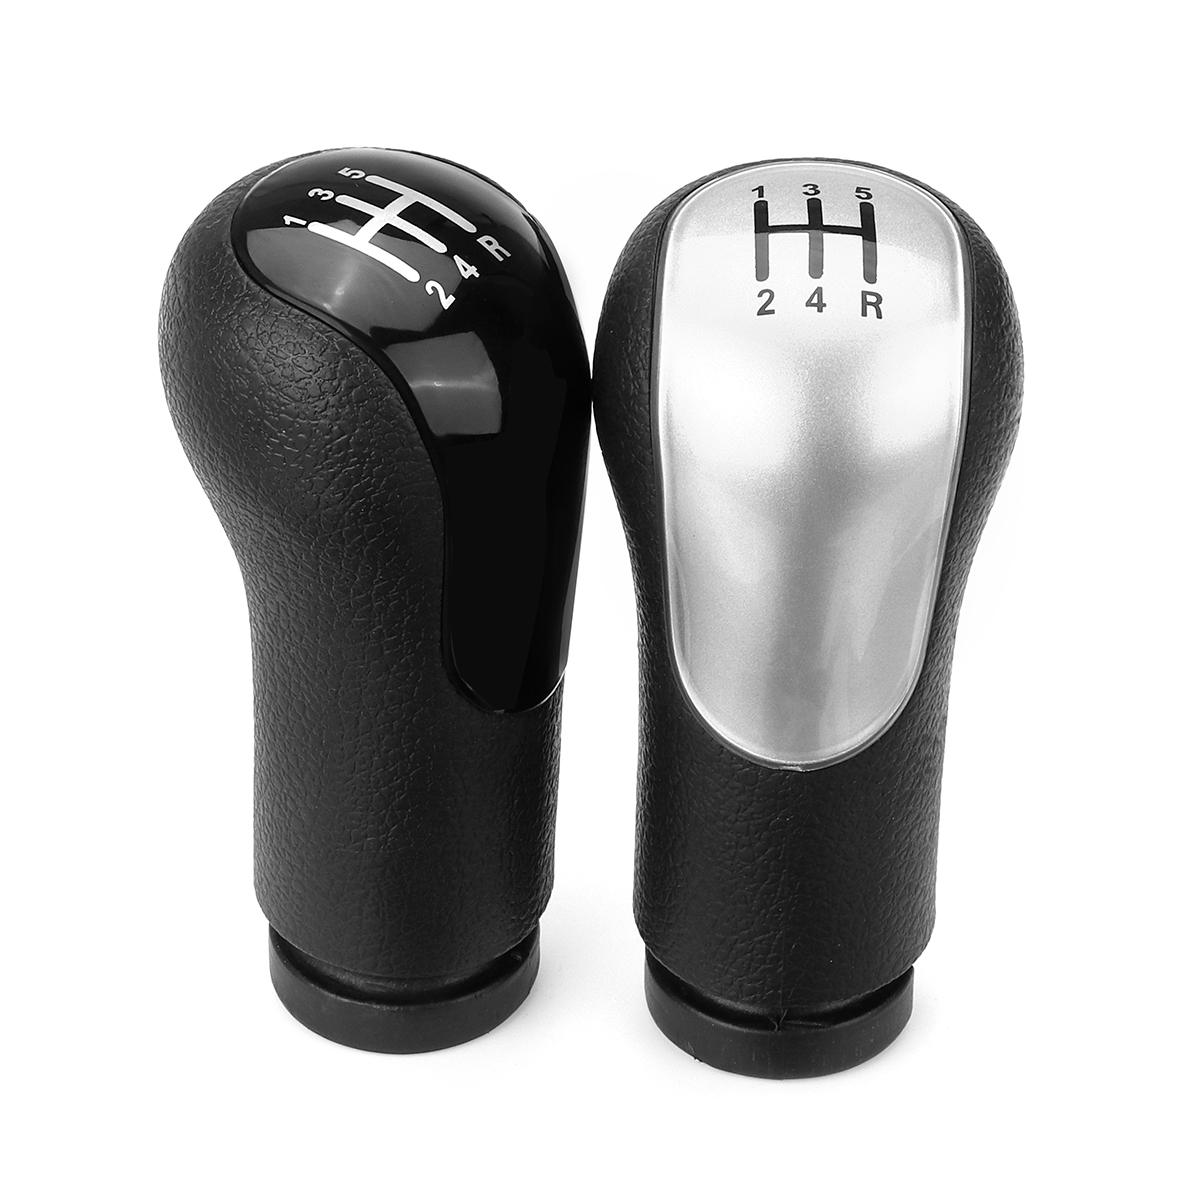 Car Gear Shift Knob for Ford for Fiesta Fusion Transit Connect 2002-2020 Gearshifter POMO Gearshift Shifter Lever Stick Pen Head